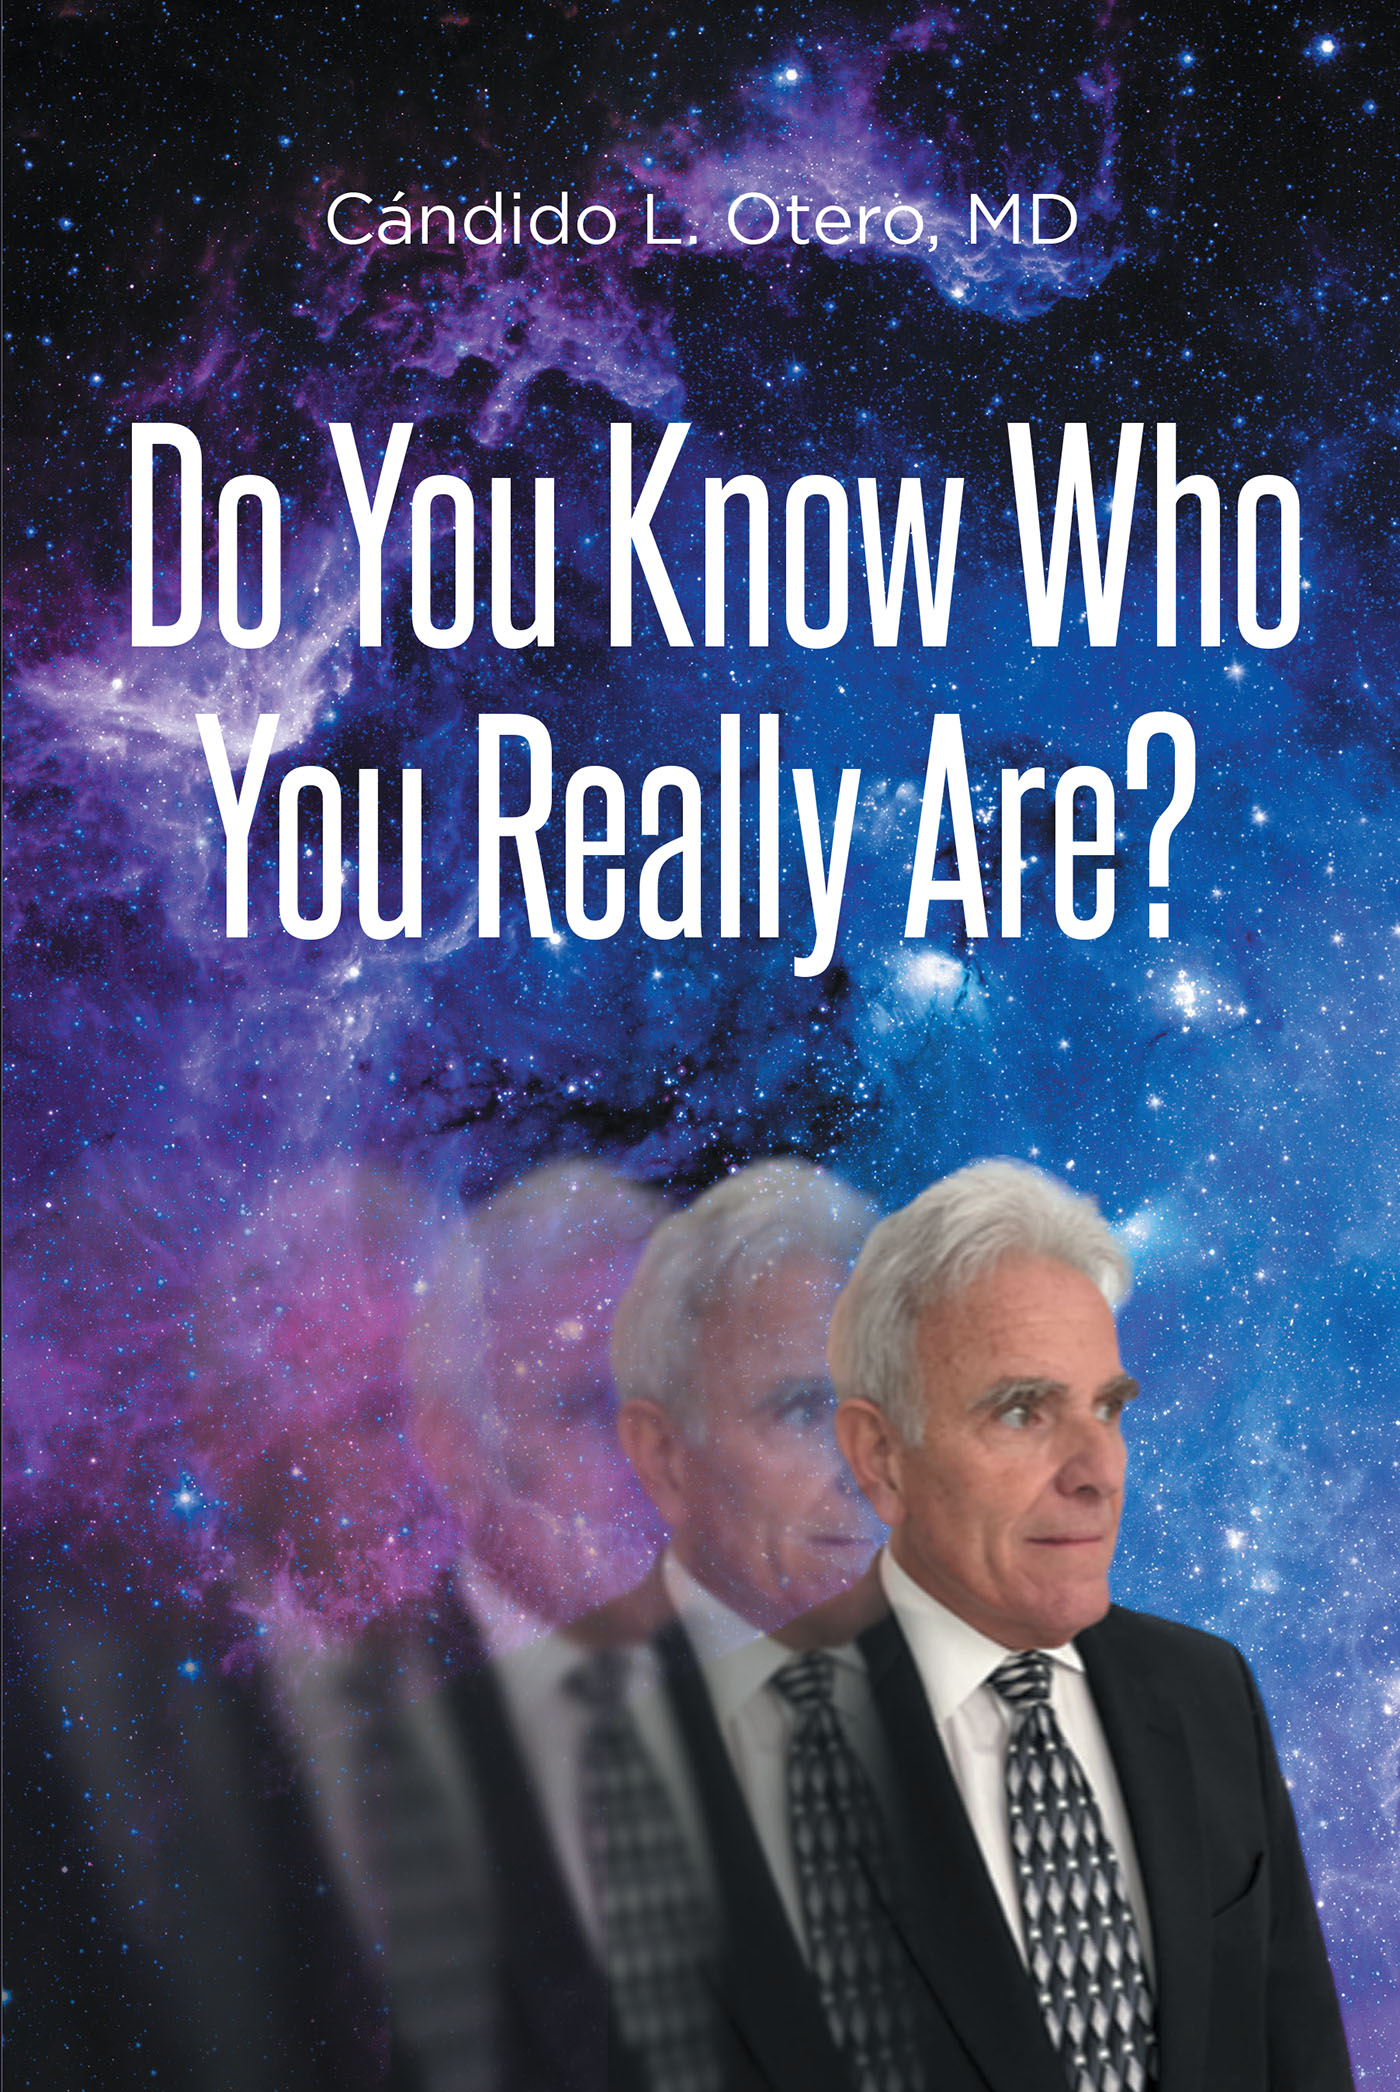 Author Cándido L. Otero, MD’s New Book, “Do You Know Who You Really Are?” Explores How an Individual Can Realize Who They Are Through Understanding Their Consciousness